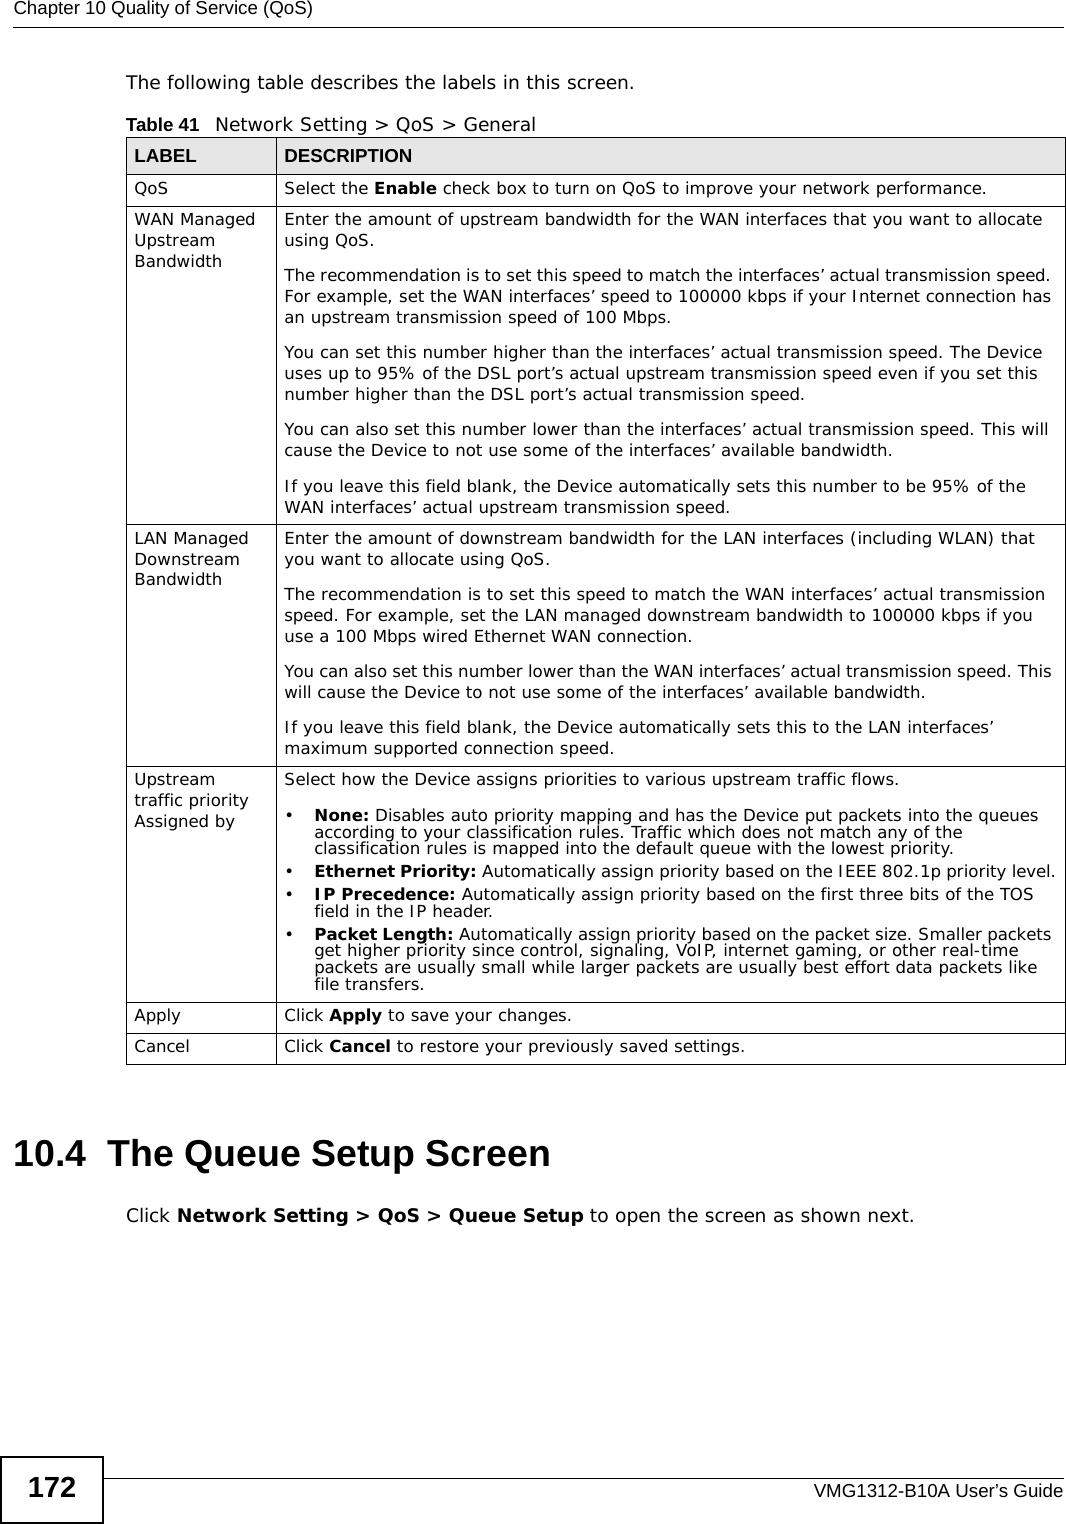 Chapter 10 Quality of Service (QoS)VMG1312-B10A User’s Guide172The following table describes the labels in this screen. 10.4  The Queue Setup ScreenClick Network Setting &gt; QoS &gt; Queue Setup to open the screen as shown next. Table 41   Network Setting &gt; QoS &gt; GeneralLABEL DESCRIPTIONQoS Select the Enable check box to turn on QoS to improve your network performance. WAN Managed Upstream Bandwidth Enter the amount of upstream bandwidth for the WAN interfaces that you want to allocate using QoS. The recommendation is to set this speed to match the interfaces’ actual transmission speed. For example, set the WAN interfaces’ speed to 100000 kbps if your Internet connection has an upstream transmission speed of 100 Mbps.        You can set this number higher than the interfaces’ actual transmission speed. The Device uses up to 95% of the DSL port’s actual upstream transmission speed even if you set this number higher than the DSL port’s actual transmission speed.You can also set this number lower than the interfaces’ actual transmission speed. This will cause the Device to not use some of the interfaces’ available bandwidth.If you leave this field blank, the Device automatically sets this number to be 95% of the WAN interfaces’ actual upstream transmission speed.LAN Managed Downstream Bandwidth Enter the amount of downstream bandwidth for the LAN interfaces (including WLAN) that you want to allocate using QoS. The recommendation is to set this speed to match the WAN interfaces’ actual transmission speed. For example, set the LAN managed downstream bandwidth to 100000 kbps if you use a 100 Mbps wired Ethernet WAN connection.        You can also set this number lower than the WAN interfaces’ actual transmission speed. This will cause the Device to not use some of the interfaces’ available bandwidth.If you leave this field blank, the Device automatically sets this to the LAN interfaces’ maximum supported connection speed.Upstream traffic priority Assigned bySelect how the Device assigns priorities to various upstream traffic flows.•None: Disables auto priority mapping and has the Device put packets into the queues according to your classification rules. Traffic which does not match any of the classification rules is mapped into the default queue with the lowest priority.•Ethernet Priority: Automatically assign priority based on the IEEE 802.1p priority level.•IP Precedence: Automatically assign priority based on the first three bits of the TOS field in the IP header.•Packet Length: Automatically assign priority based on the packet size. Smaller packets get higher priority since control, signaling, VoIP, internet gaming, or other real-time packets are usually small while larger packets are usually best effort data packets like file transfers.Apply Click Apply to save your changes.Cancel Click Cancel to restore your previously saved settings.